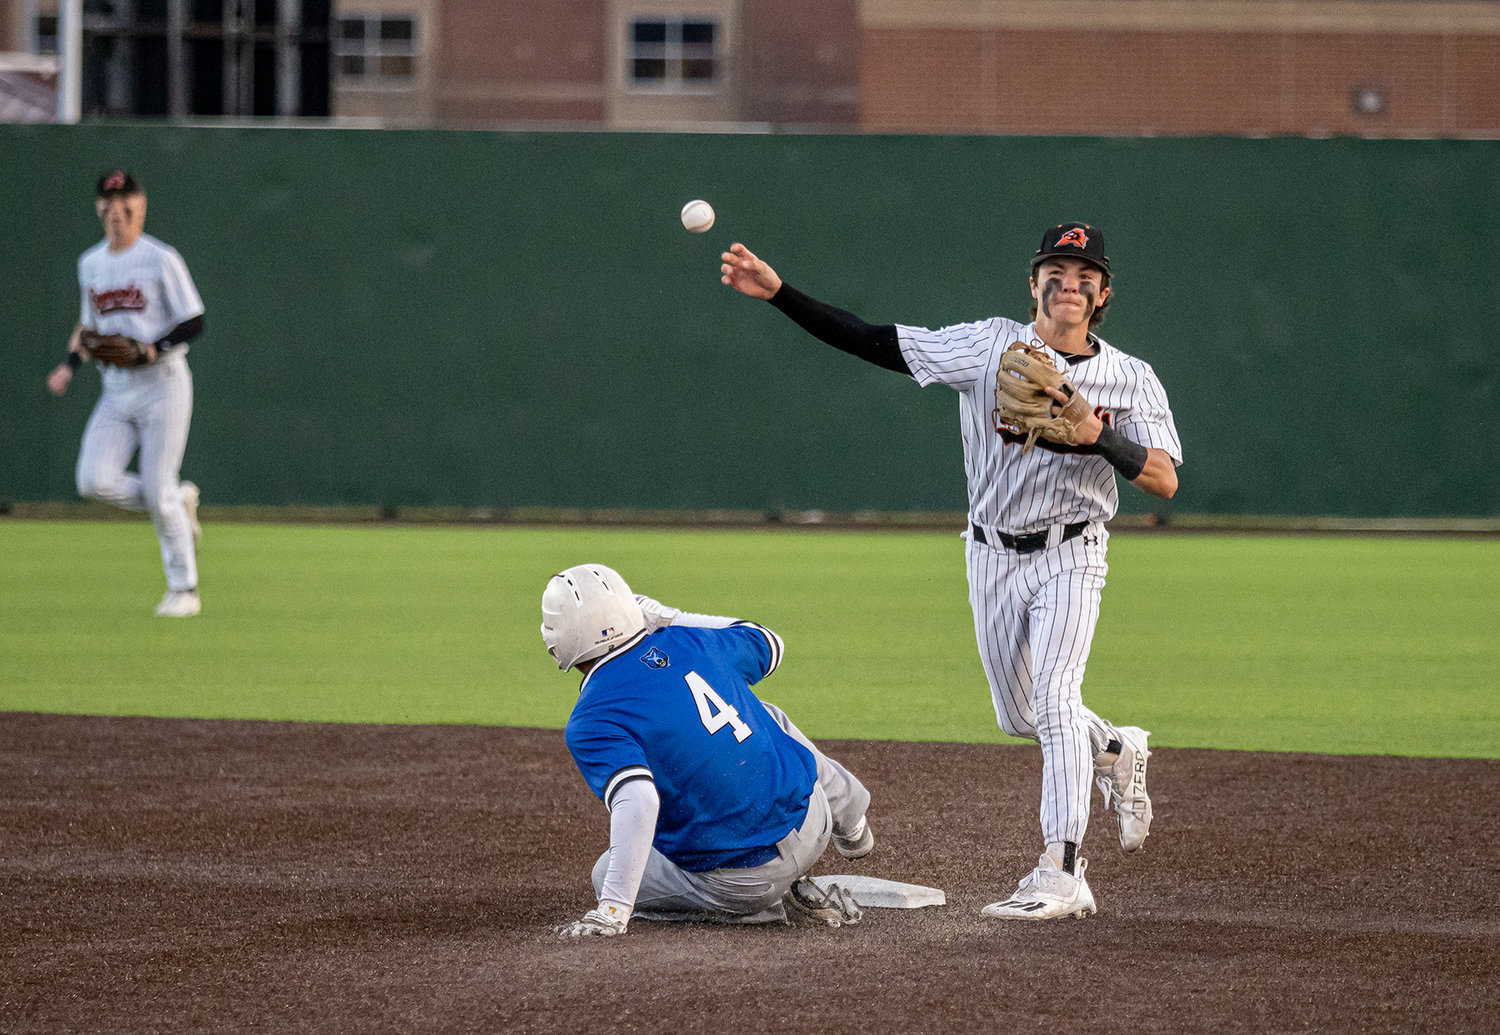 Boyd Thompson successfully turns the first half of a 6-4-3 double play to end Brewer's half of the second inning in the District opener on Tuesday, March 21. The Bears defeated Aledo, 3-1.